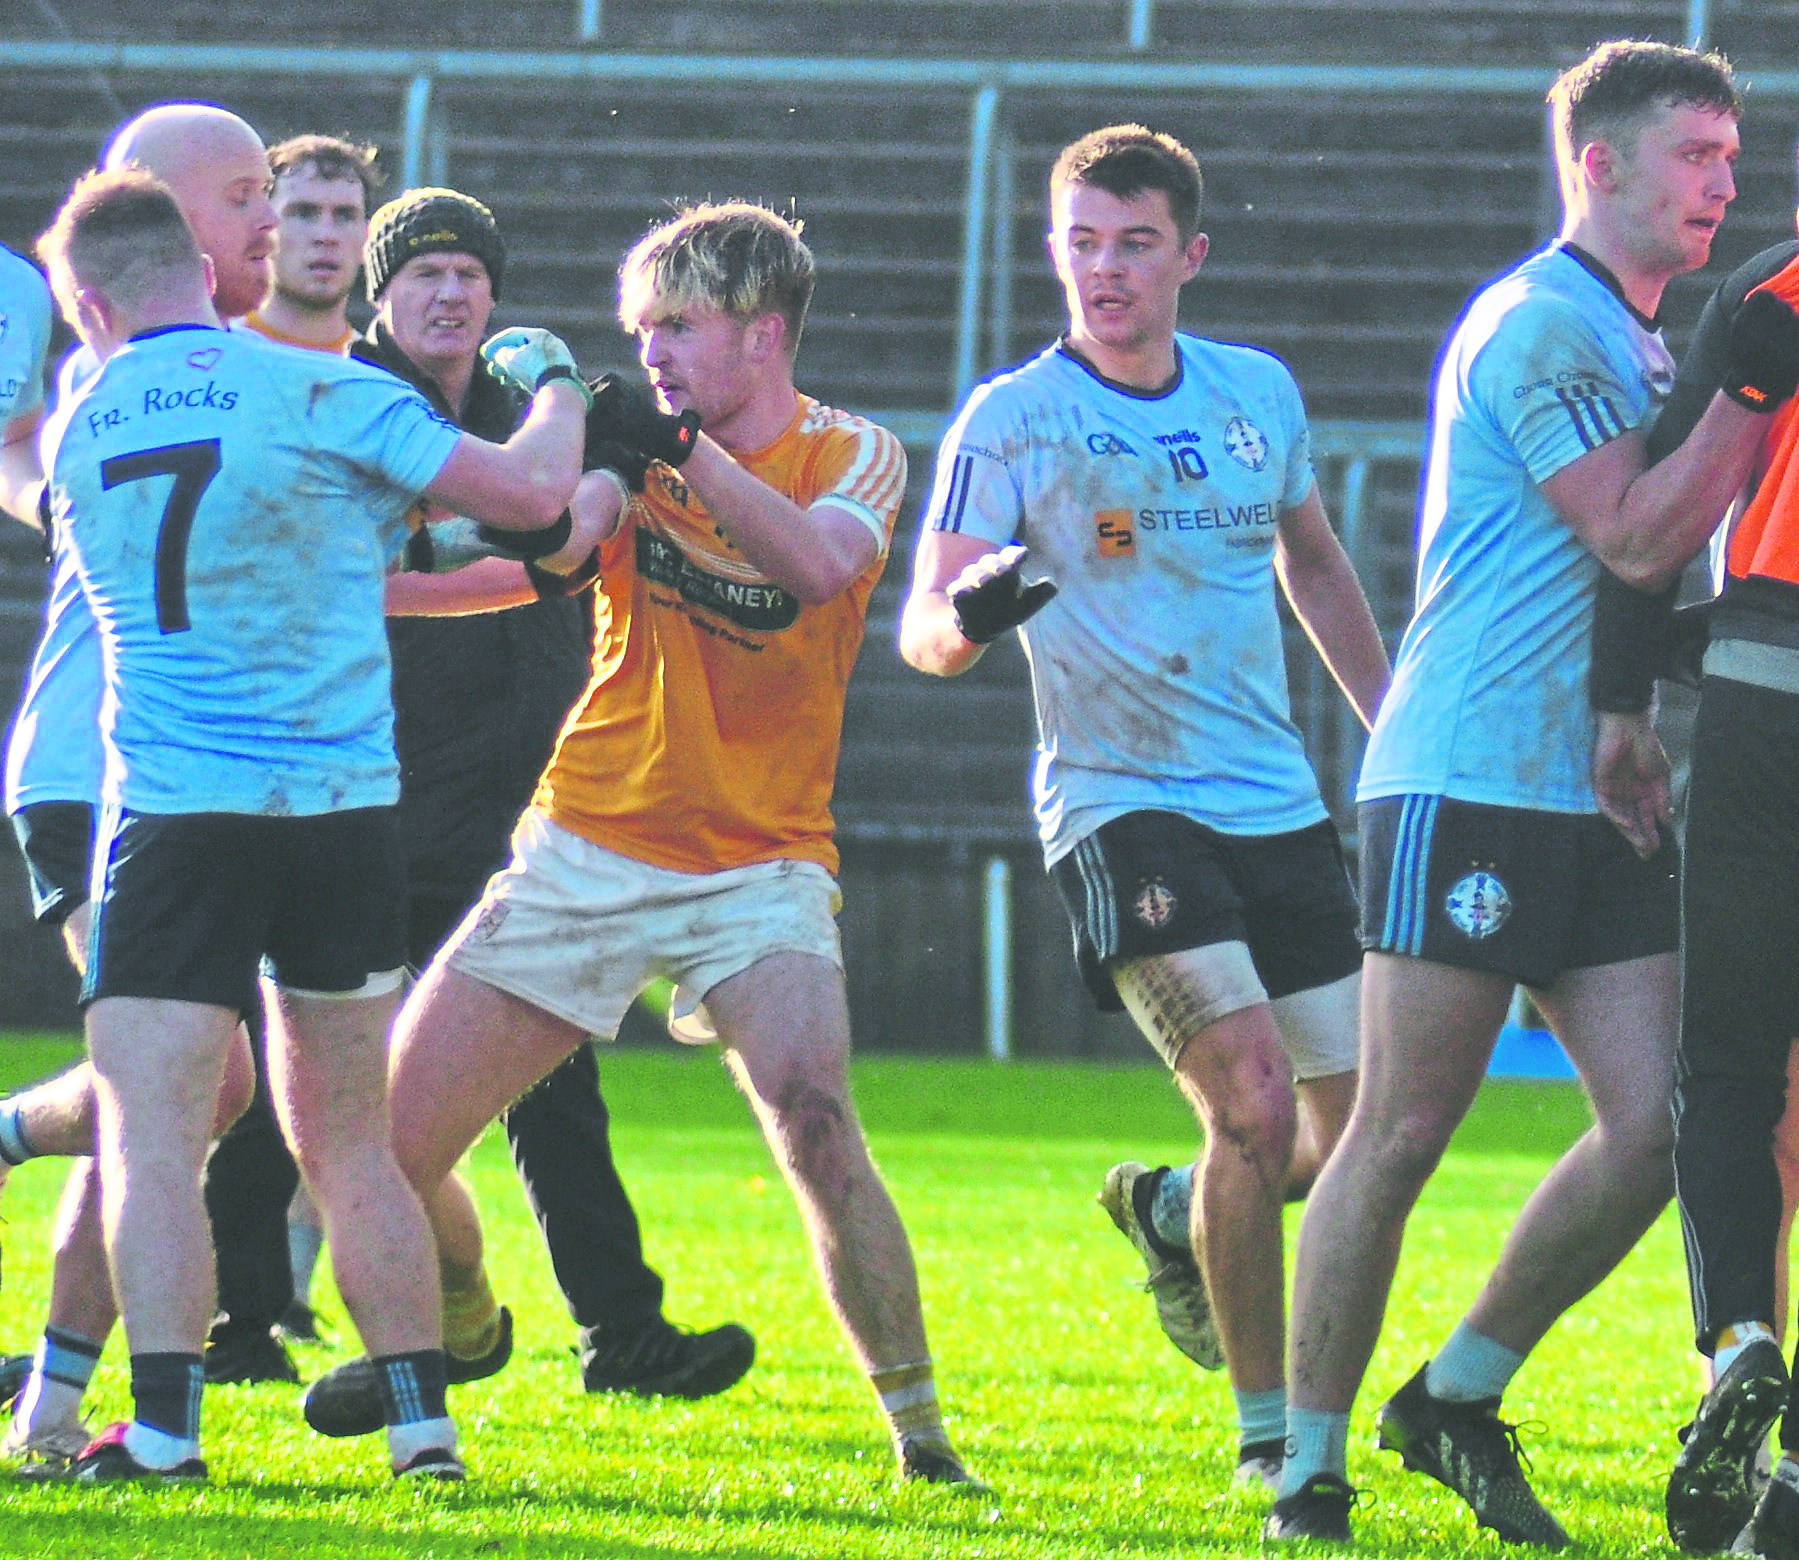 Cookstown selector takes issue with officiating in heated provincial defeat